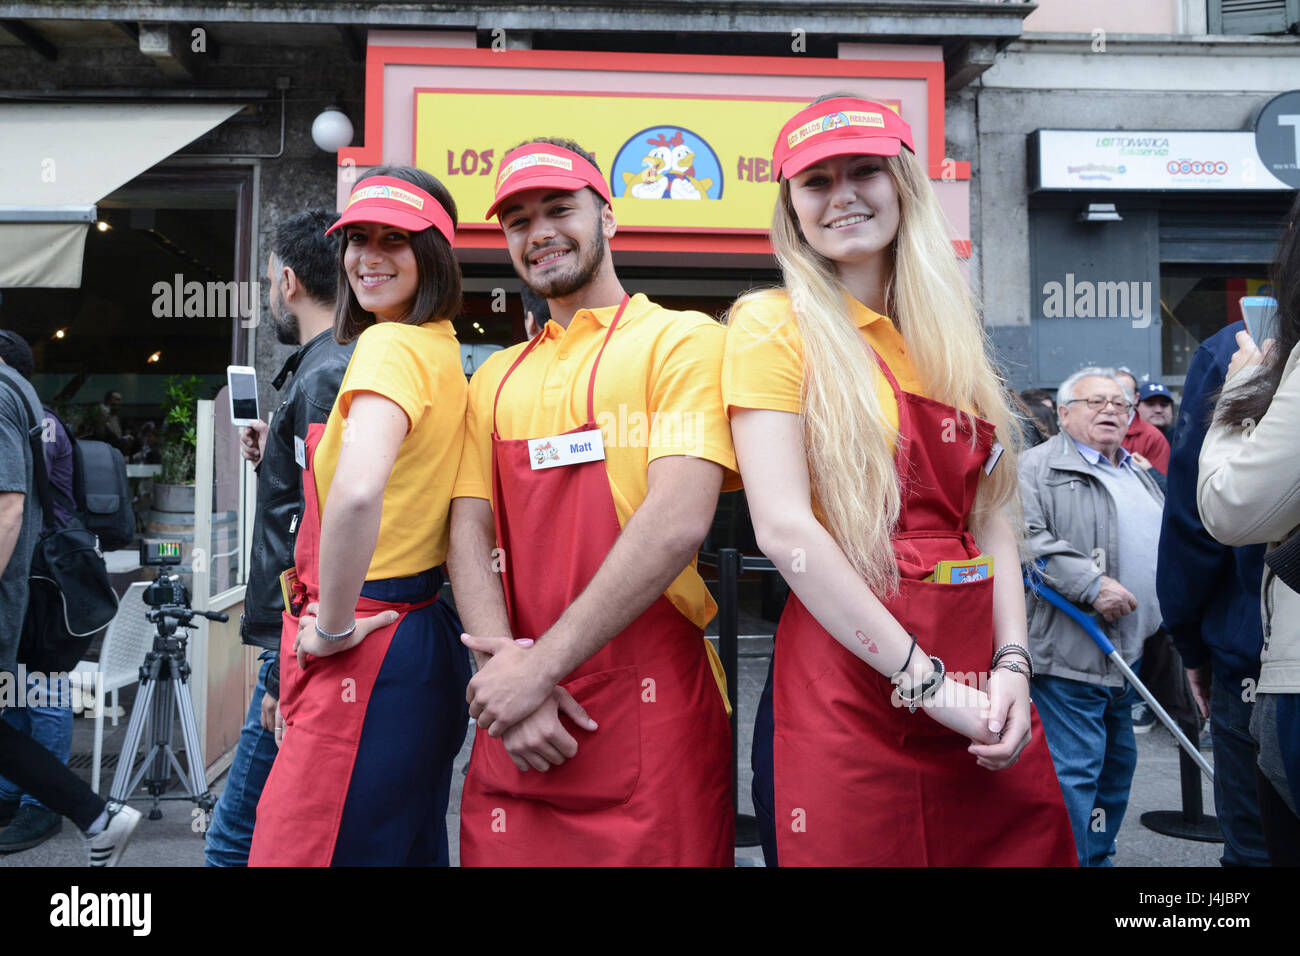 Milan, Breaking Bad Los Pollos Hermanos opens in Milan for two days in the  picture Stock Photo - Alamy